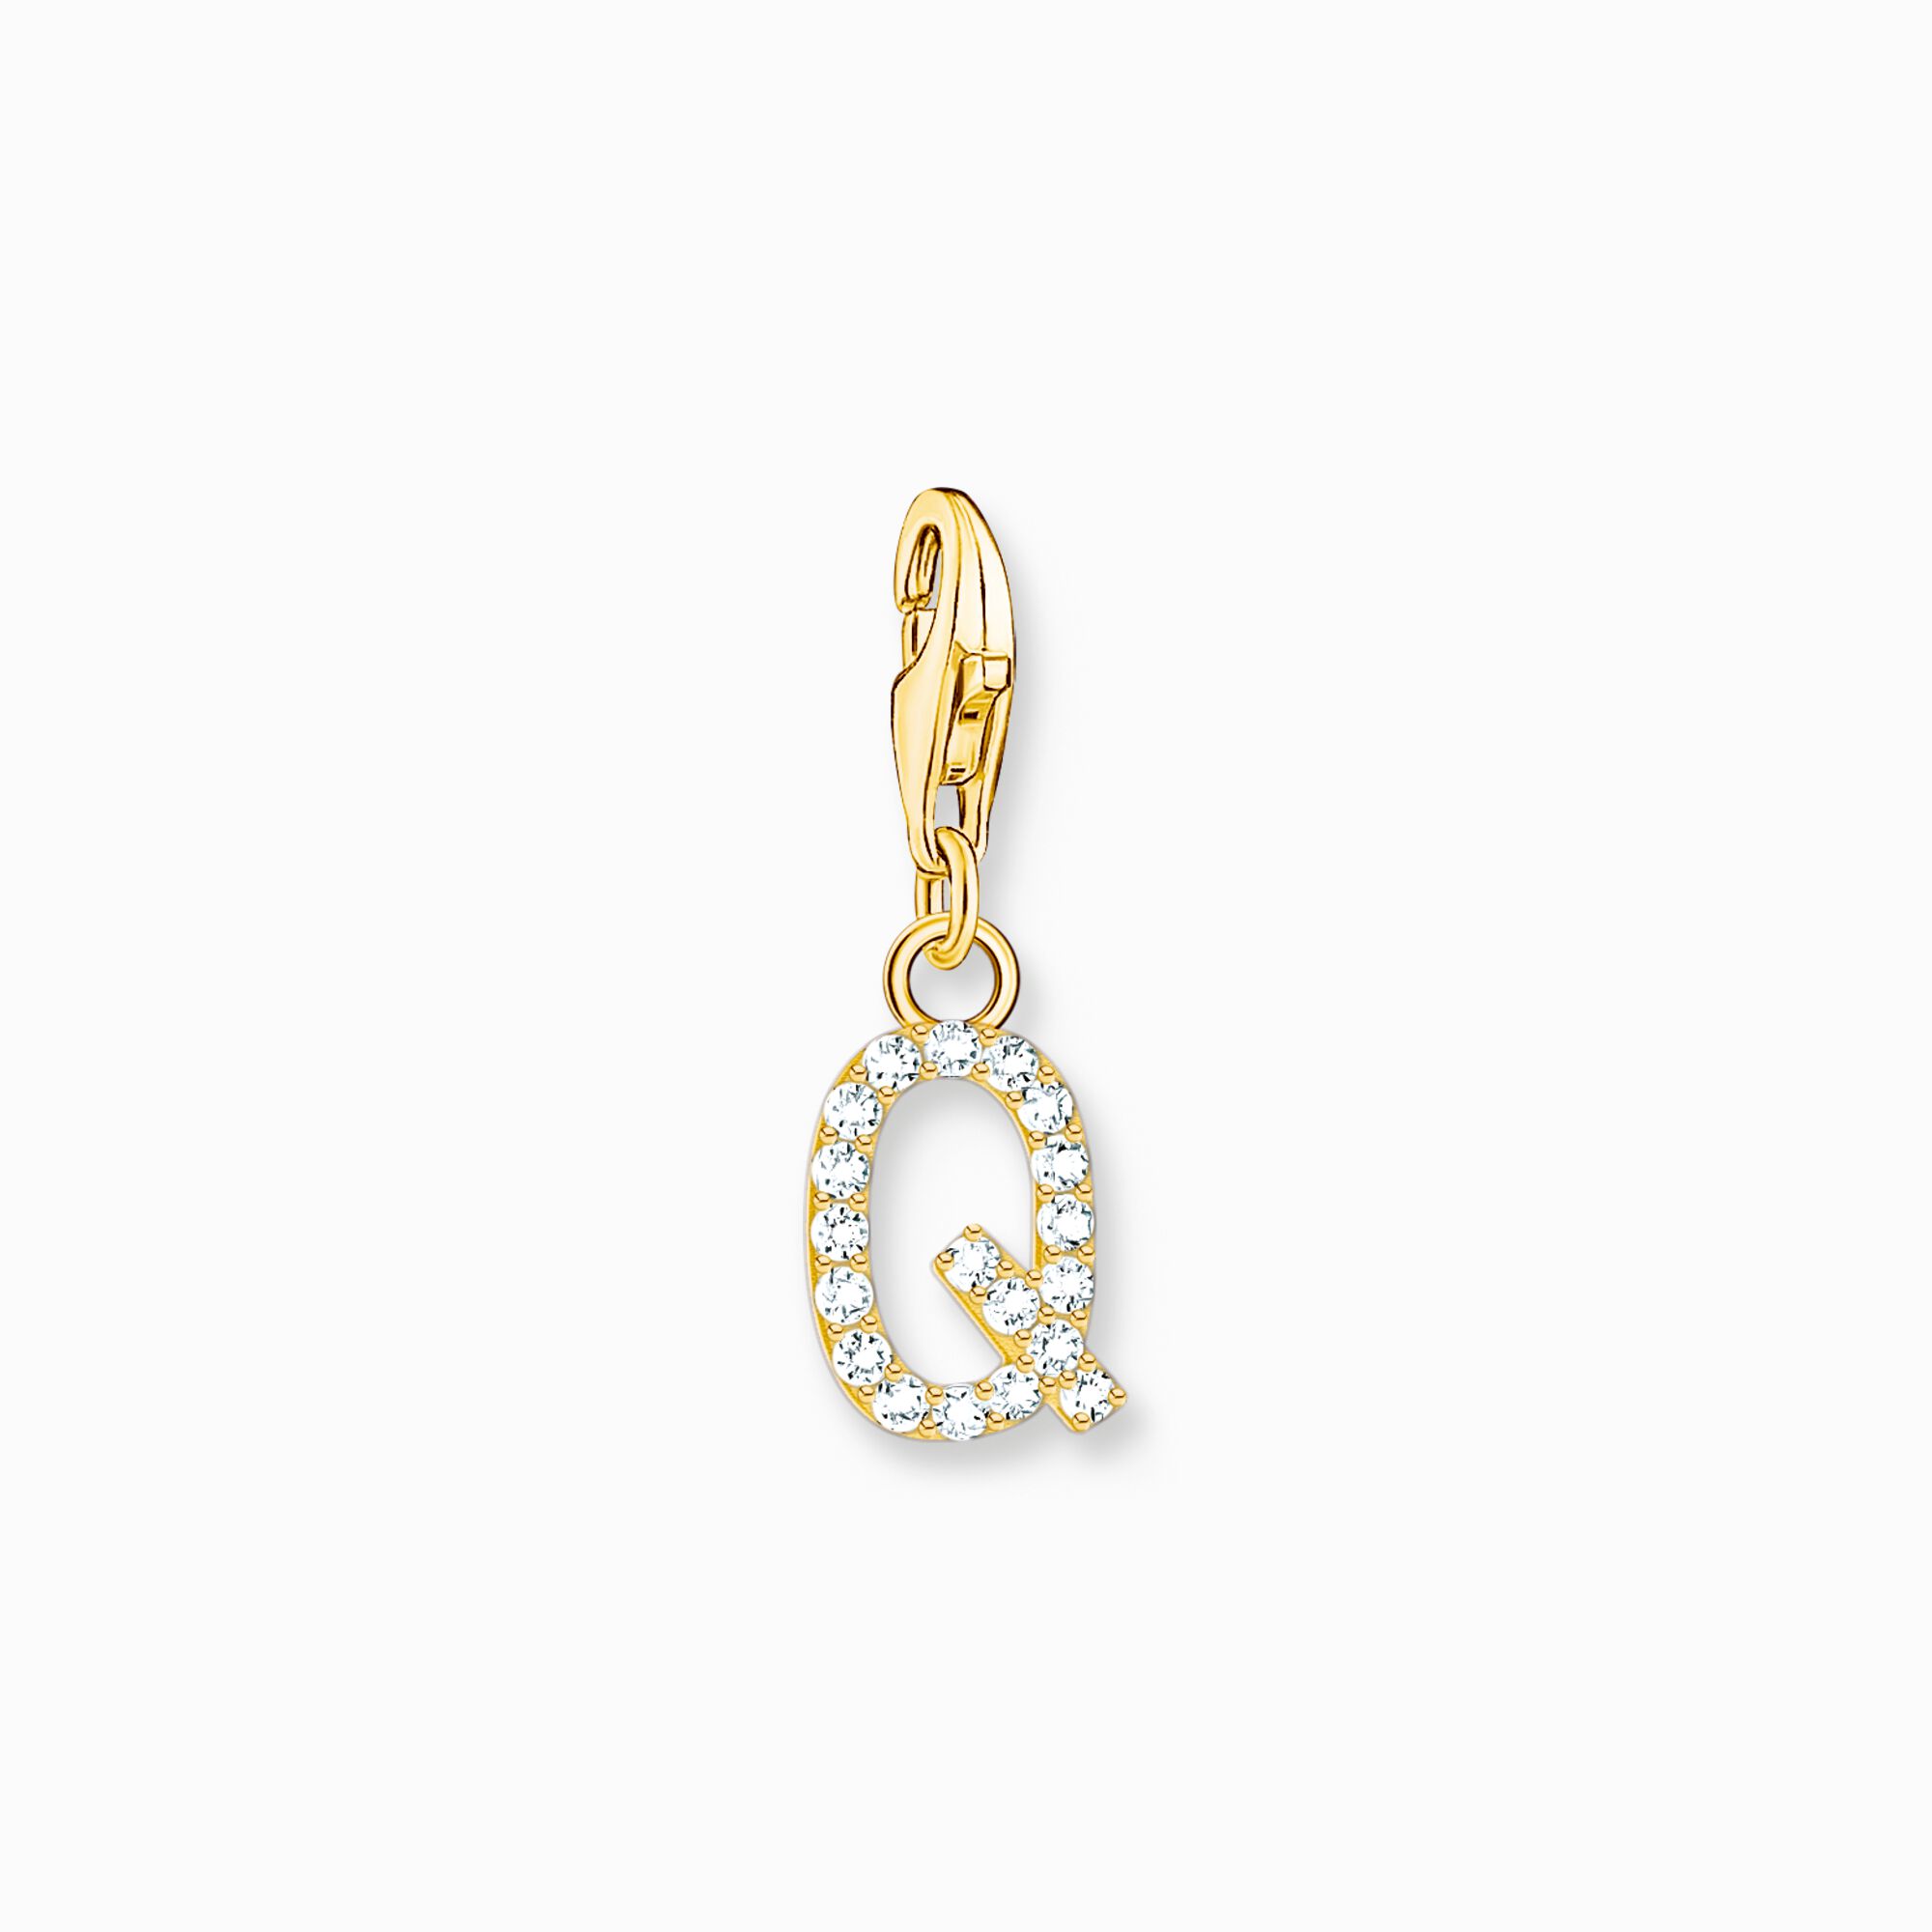 Charm pendant letter Q with white stones gold plated from the Charm Club collection in the THOMAS SABO online store